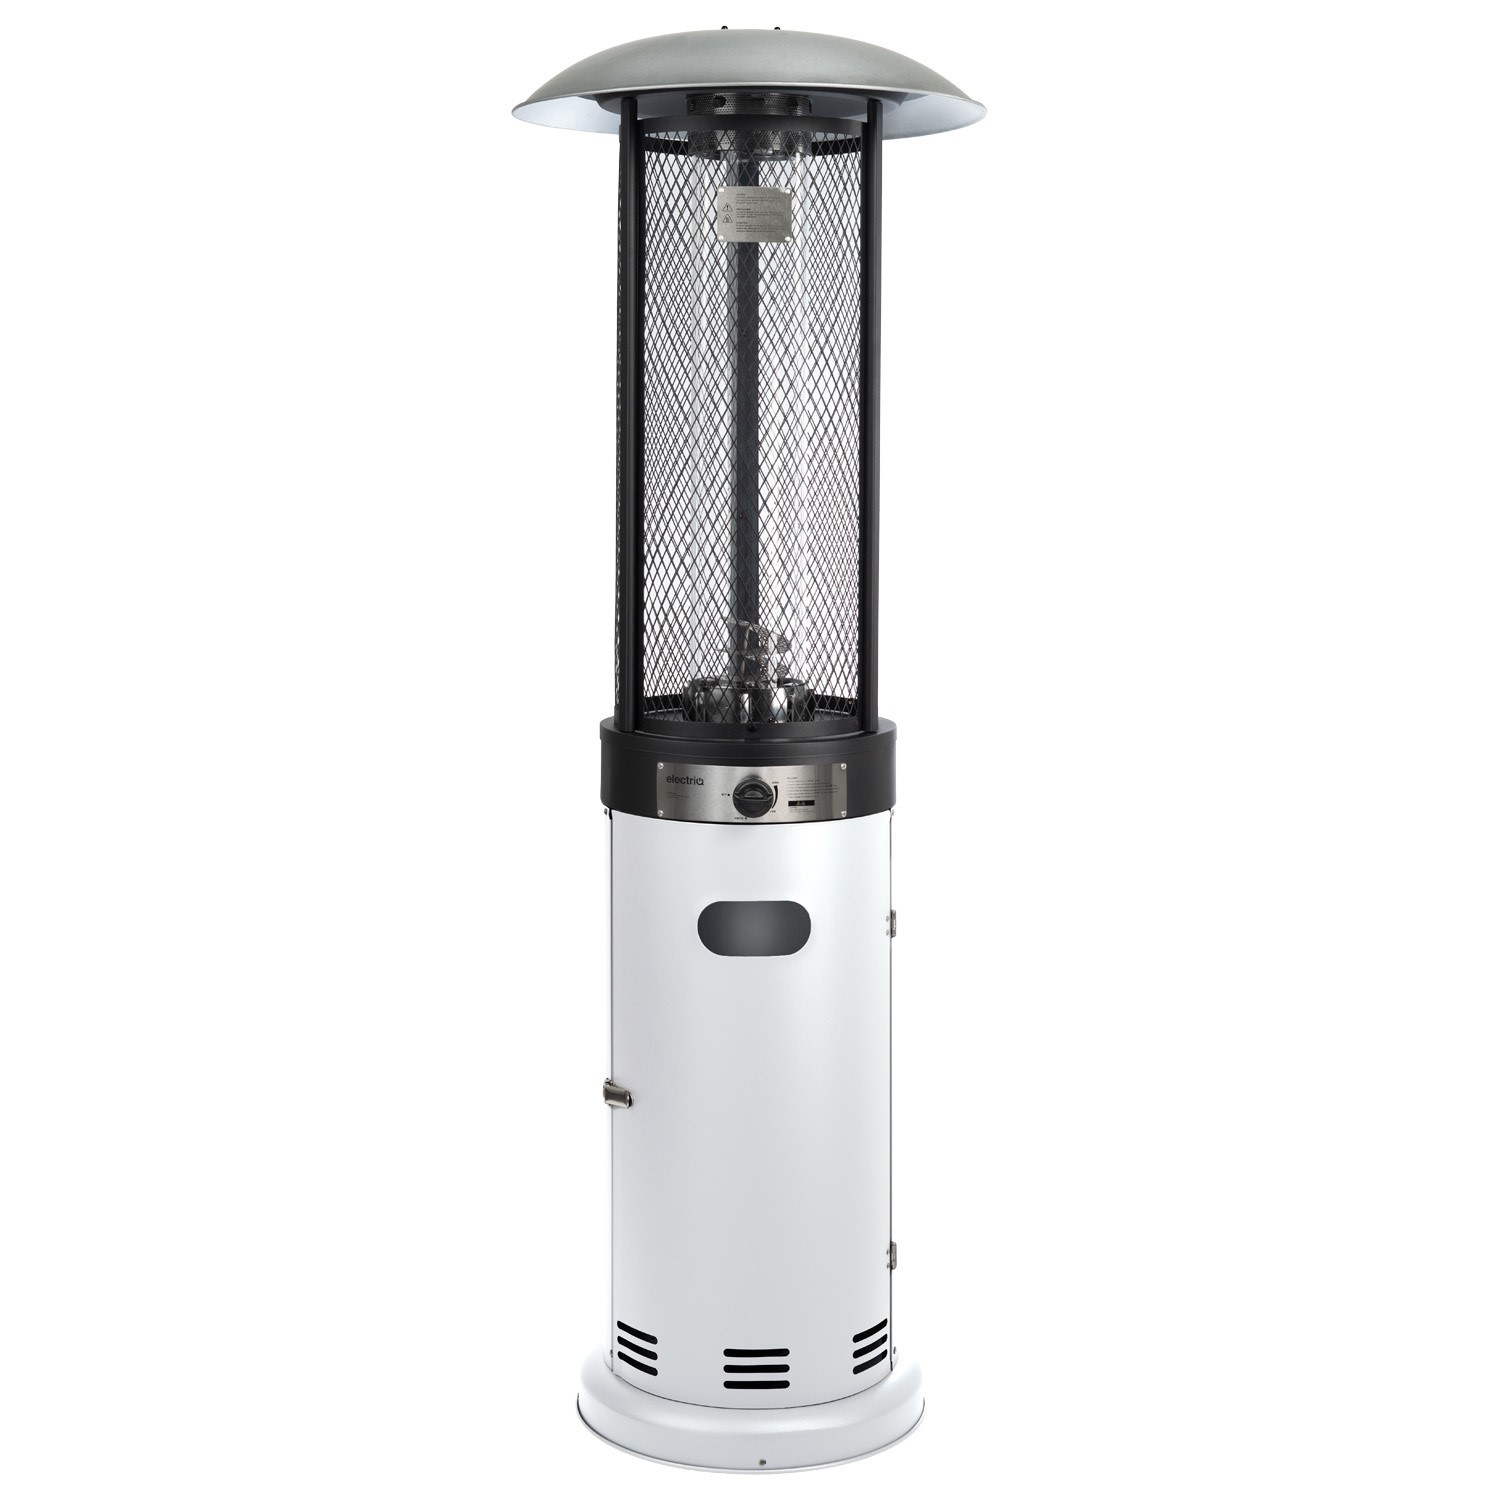 Refurbished electriQ Outdoor Freestanding Gas Patio Heater In White with Free Cover